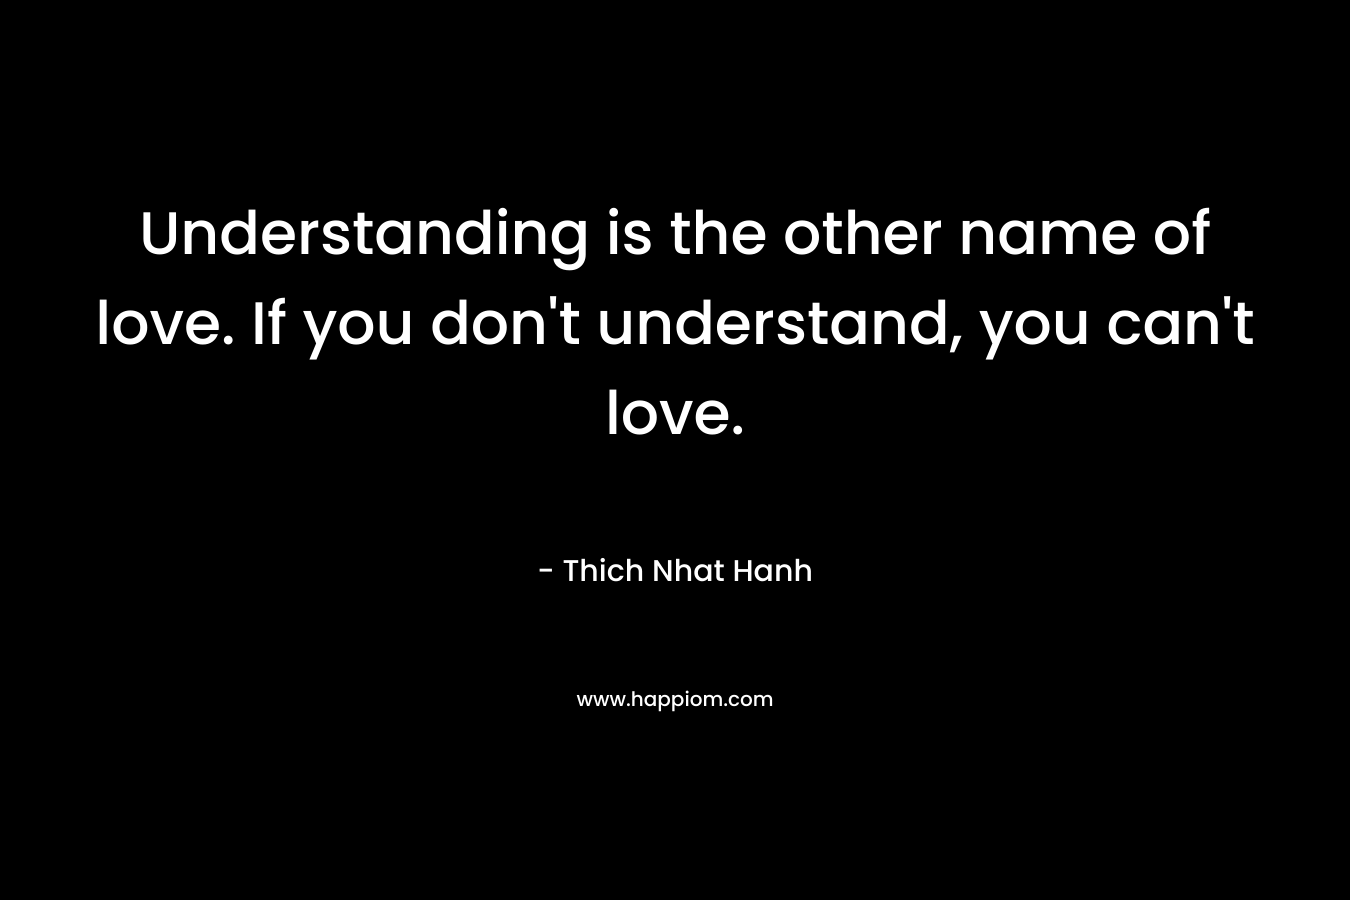 Understanding is the other name of love. If you don't understand, you can't love.